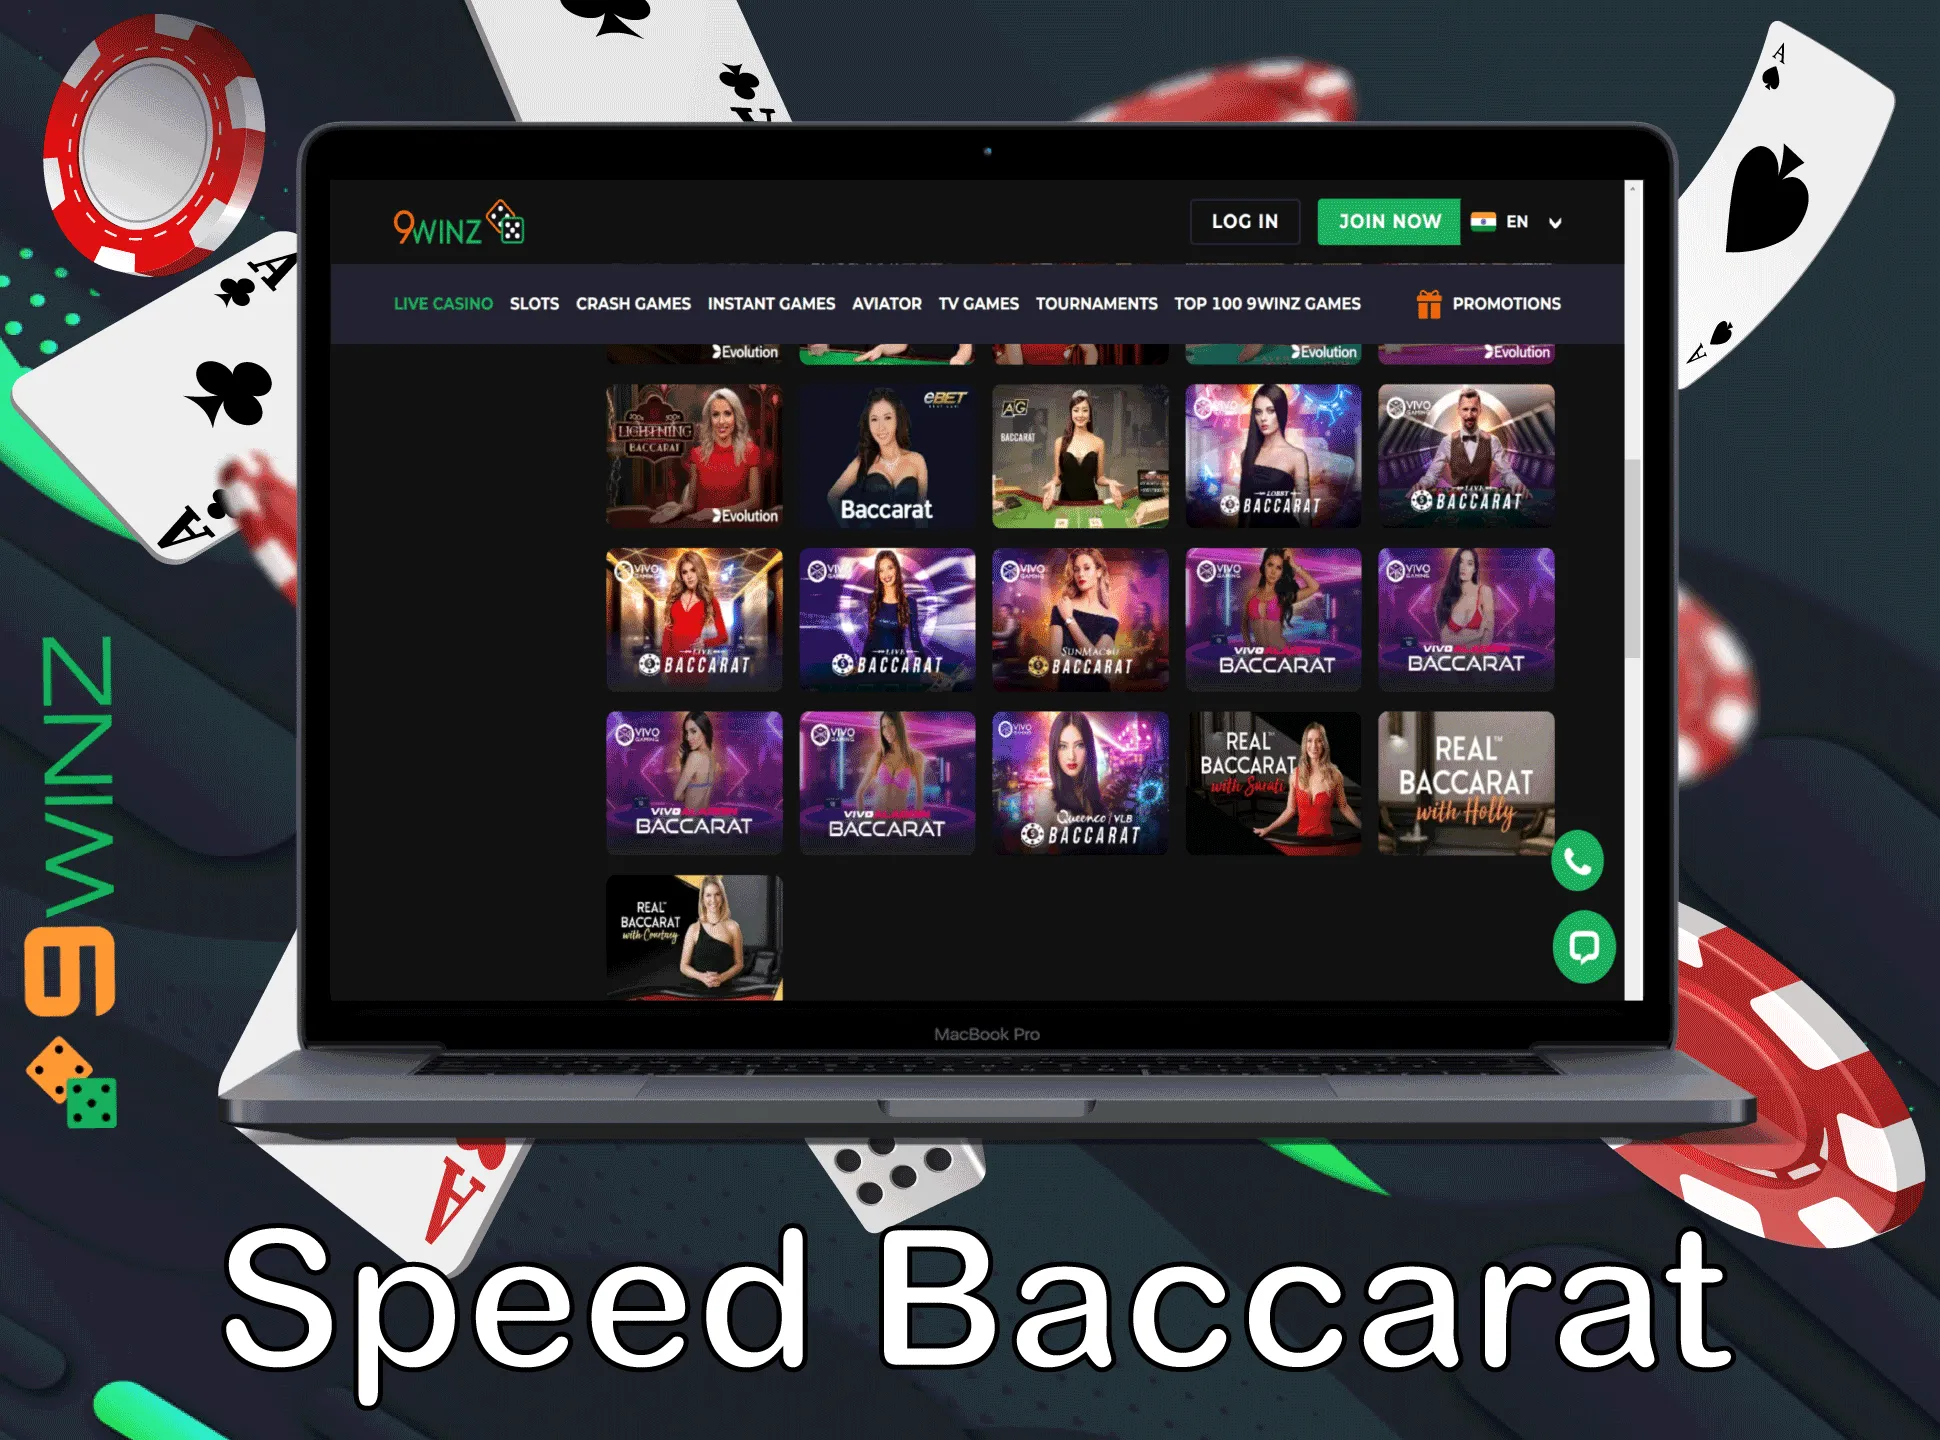 Make more bets in the 9winz speed baccarat.